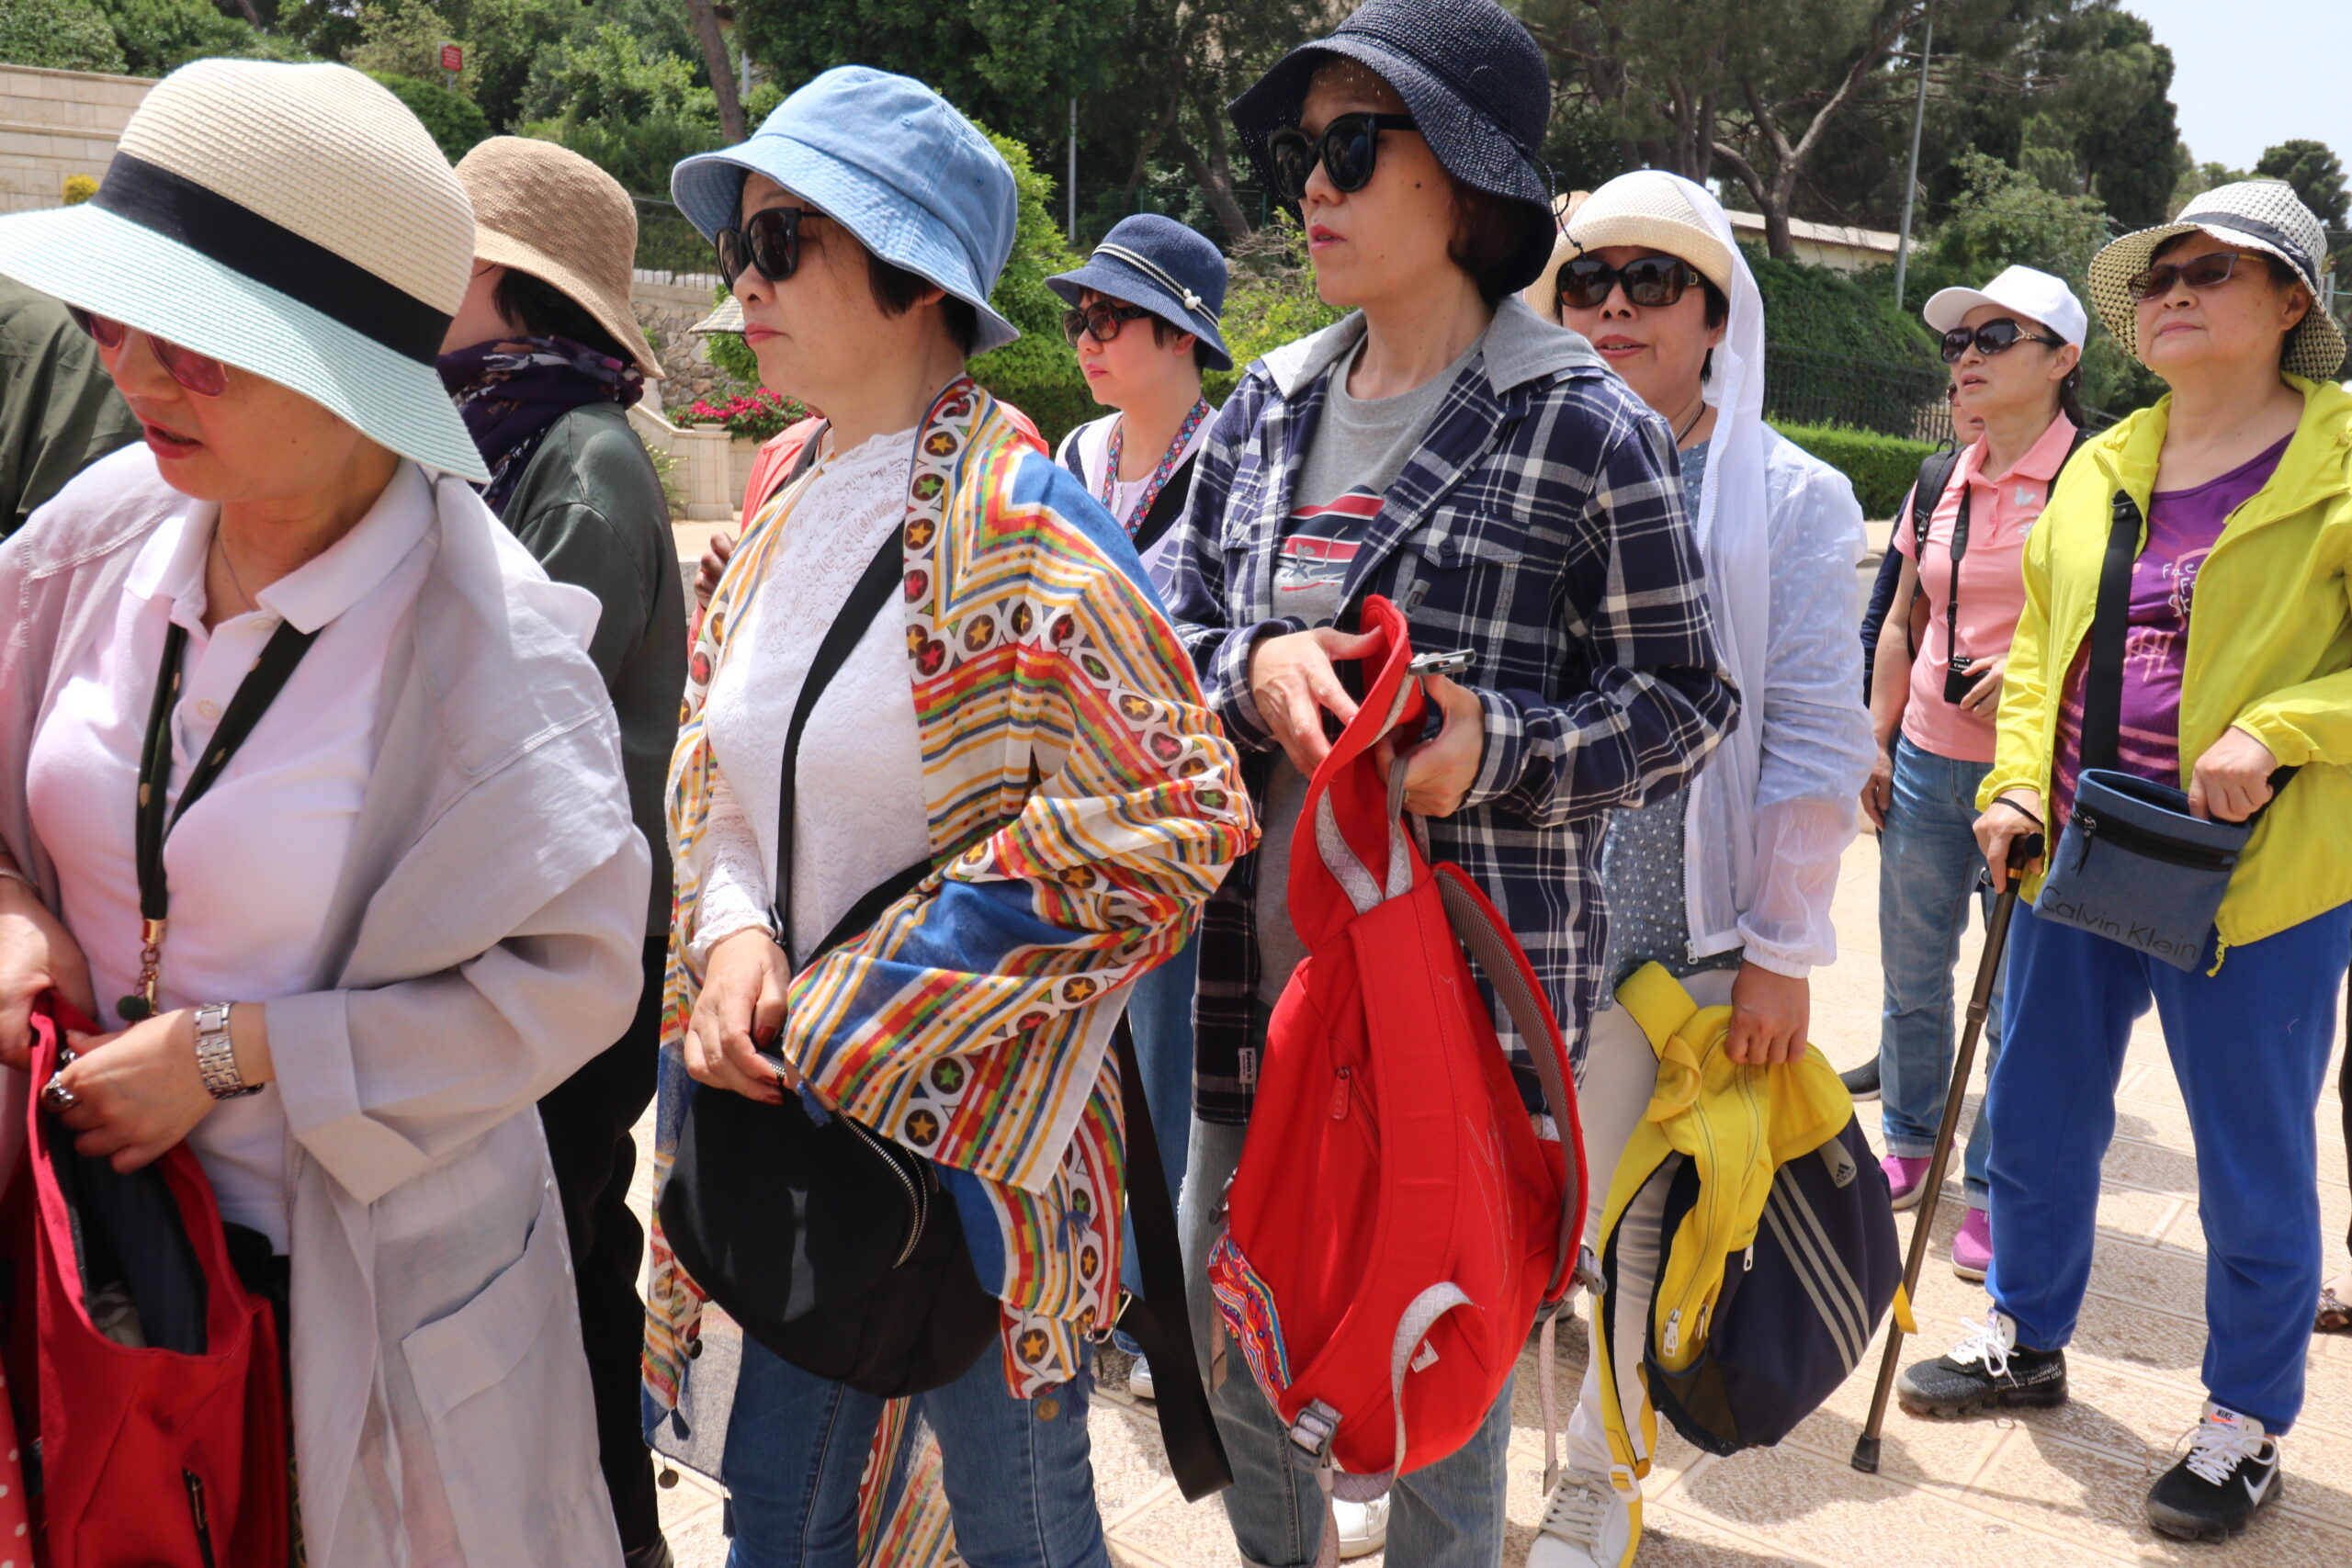 The Decline of China's Outbound Tourism: A Visual Reflection